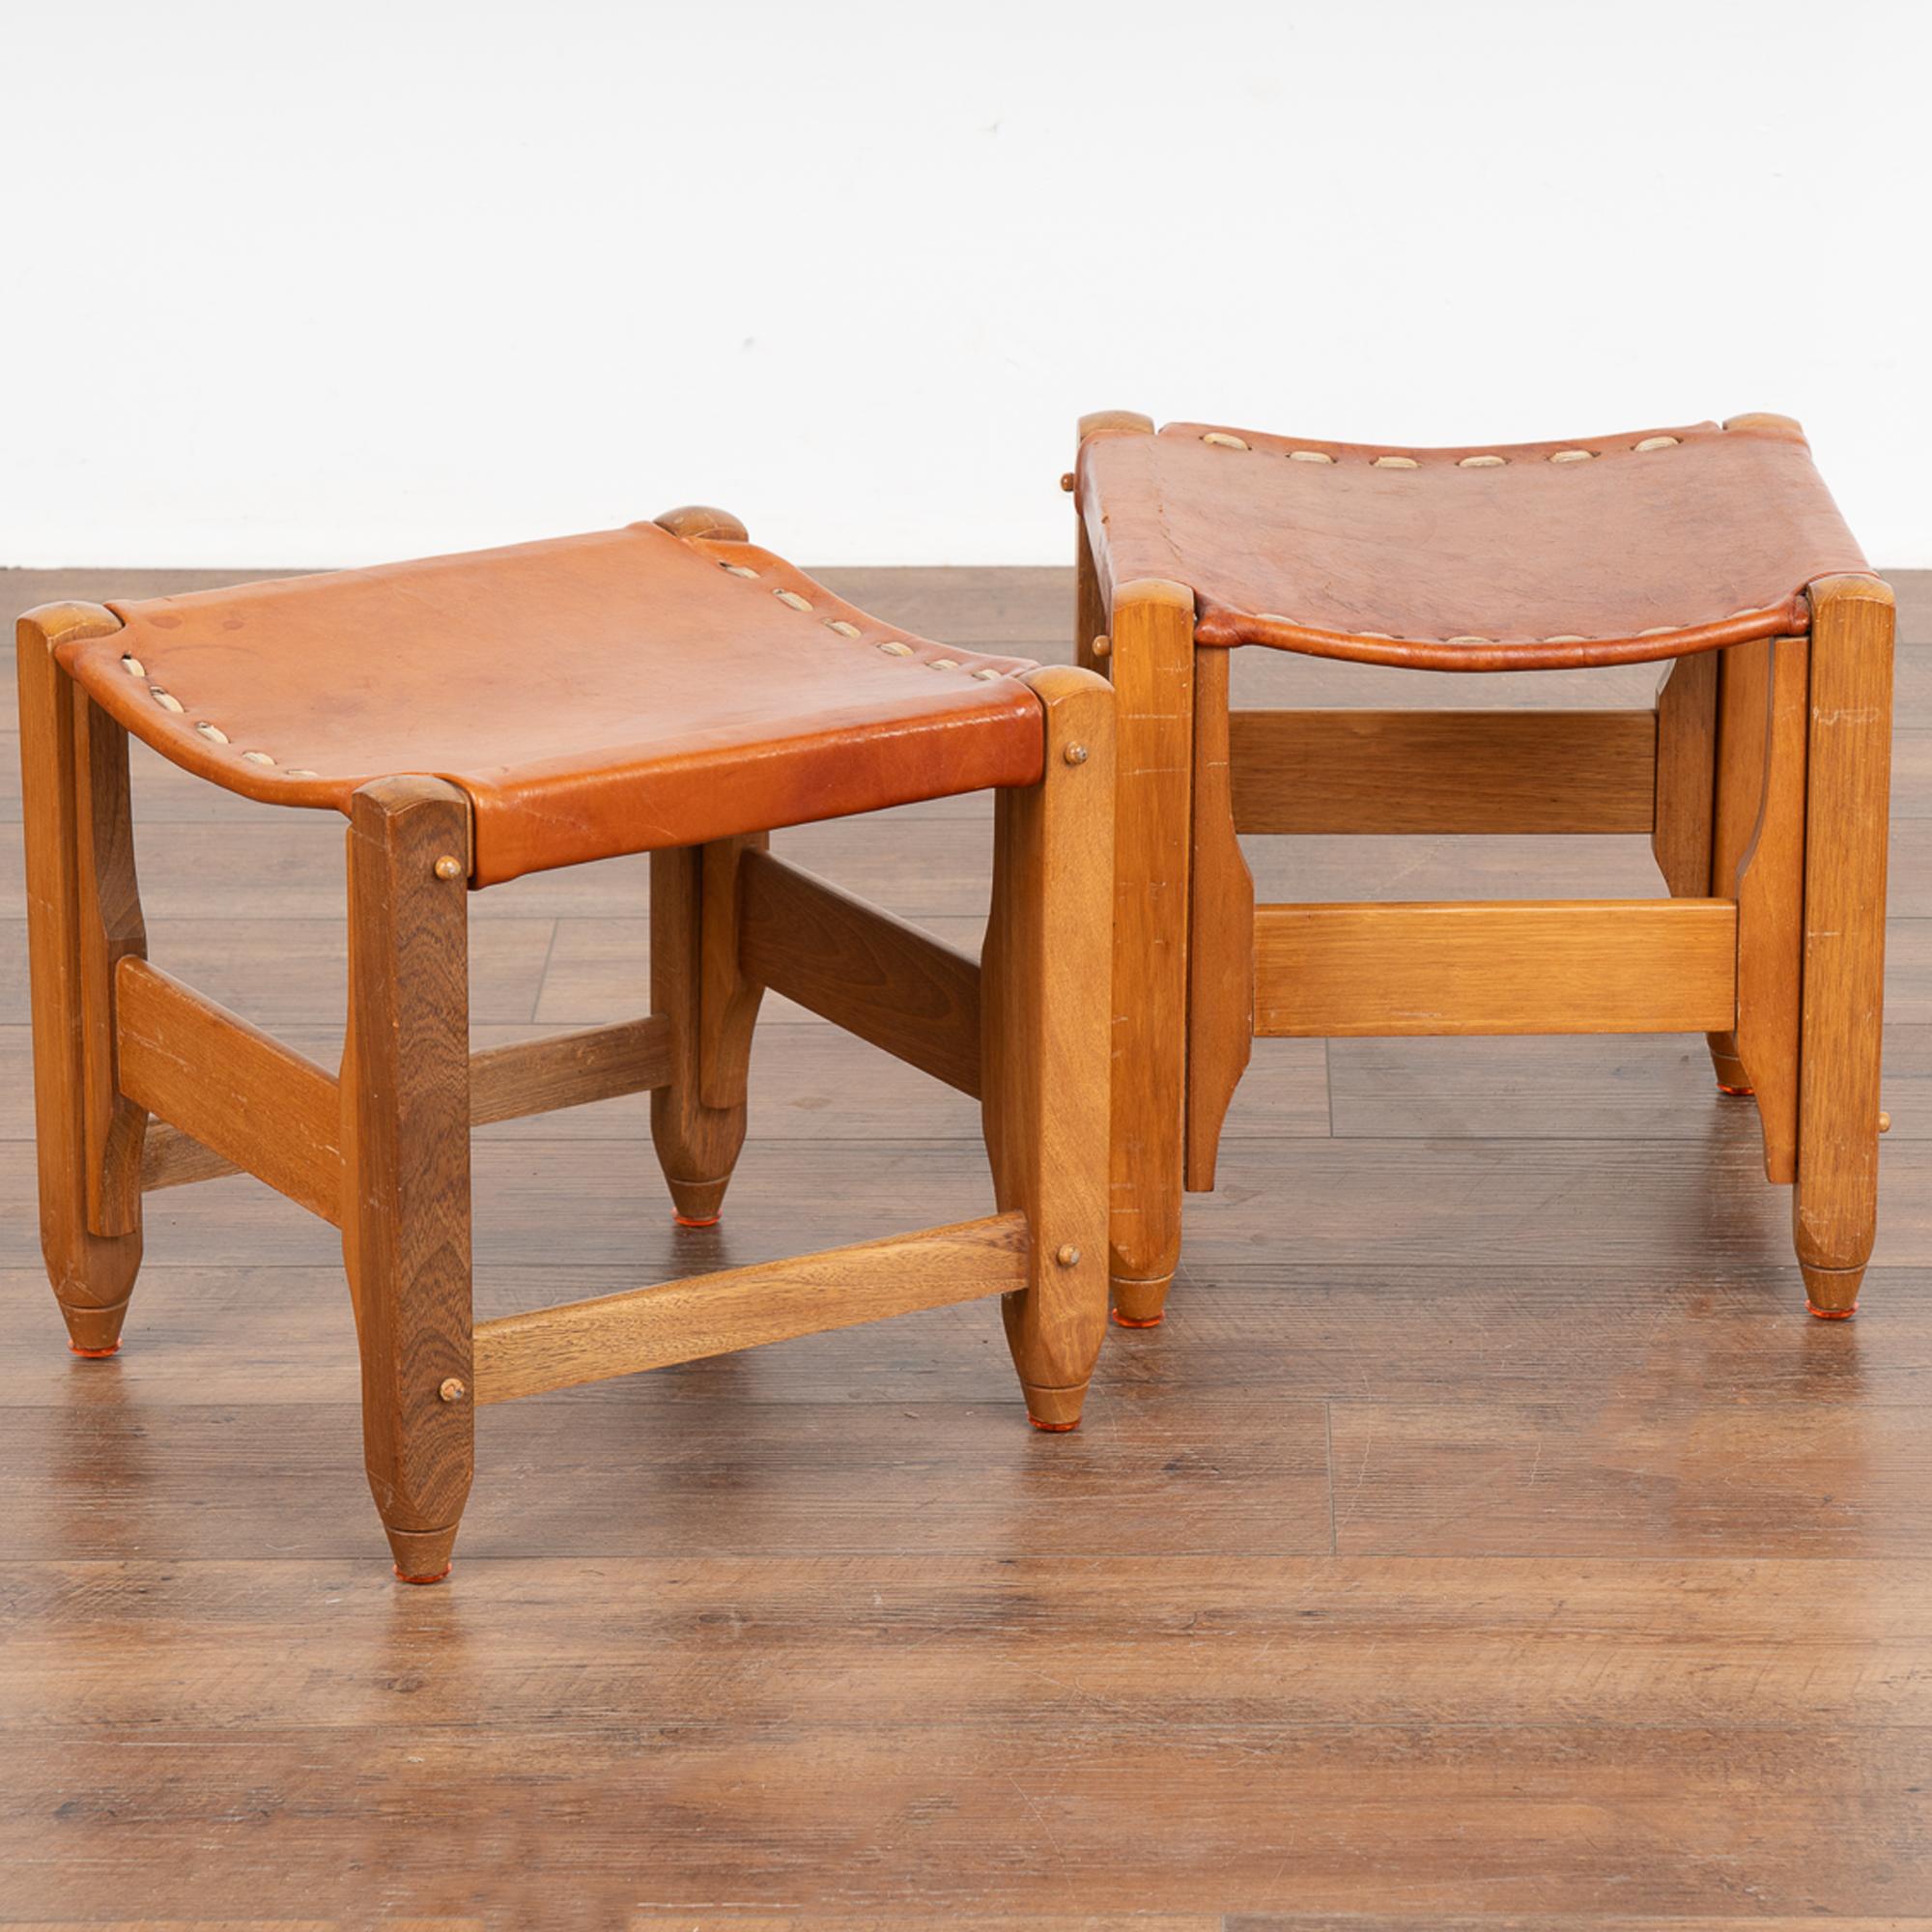 Pair, mid-century modern leather stools with hardwood frame. Note the contrasting leather stitching that adds to the retro look of the leather seats.
Vintage brown leather seats show crackles, stains, scratches, etc. and will likely benefit from